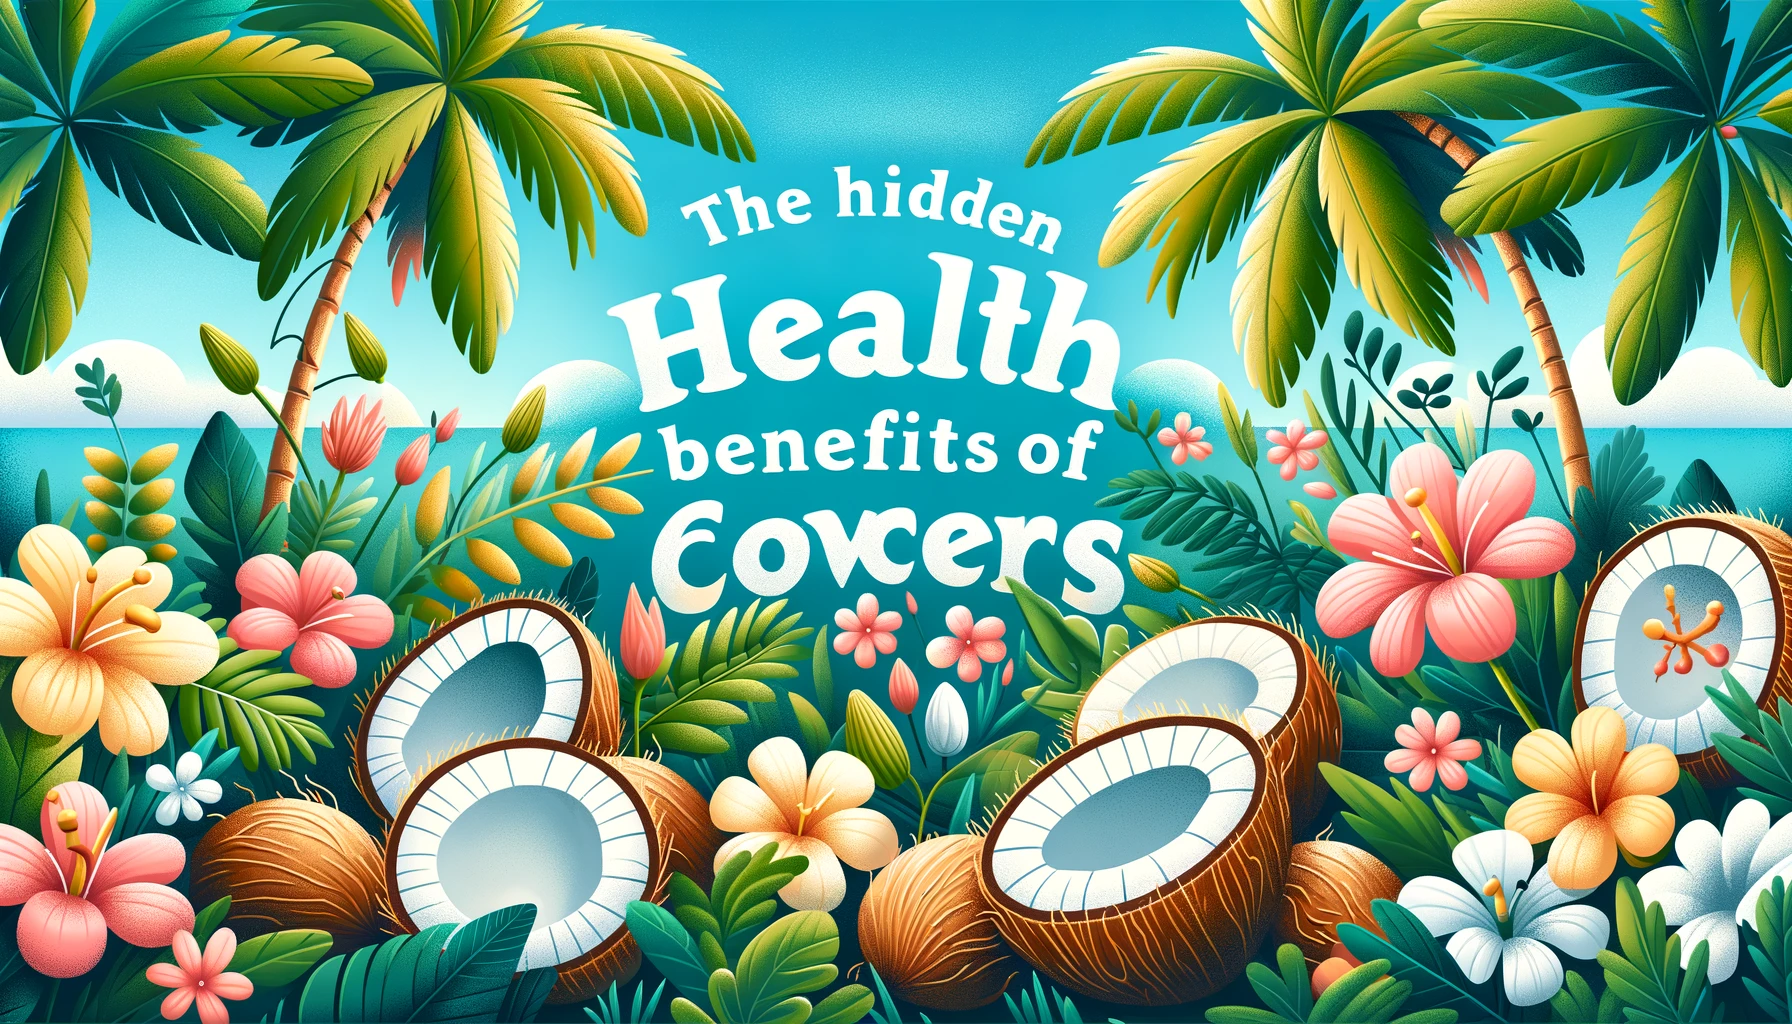 featured image for your post about the health benefits of coconut flowers